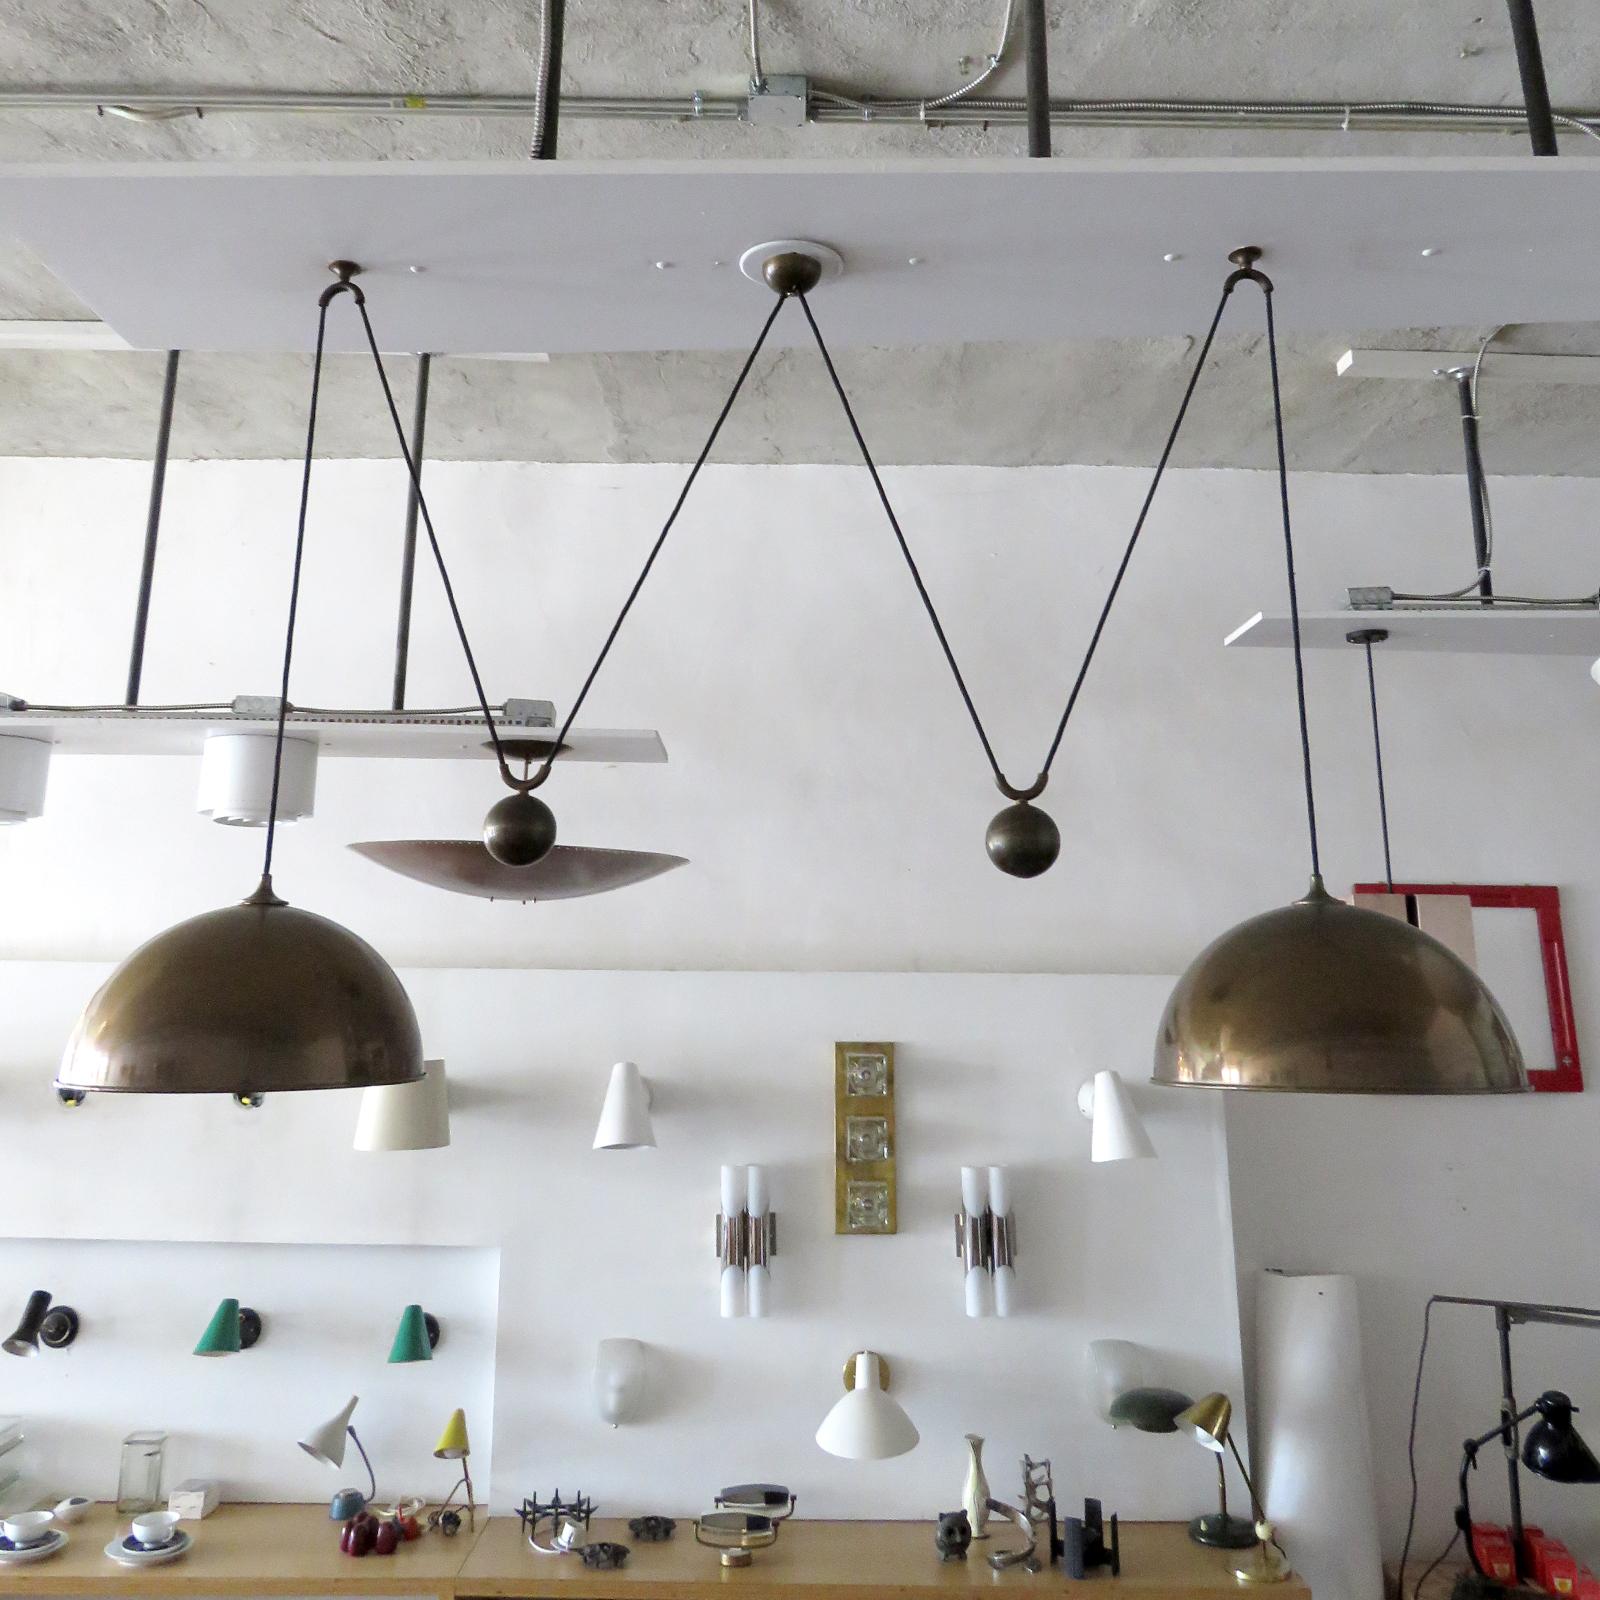 Stunning double brass counter balance pendant by Florian Schulz in great vintage condition, with two brass pendants suspended, each with their own very heavy brass ball counter balance pulley system and black cloth cord, supported by a single center